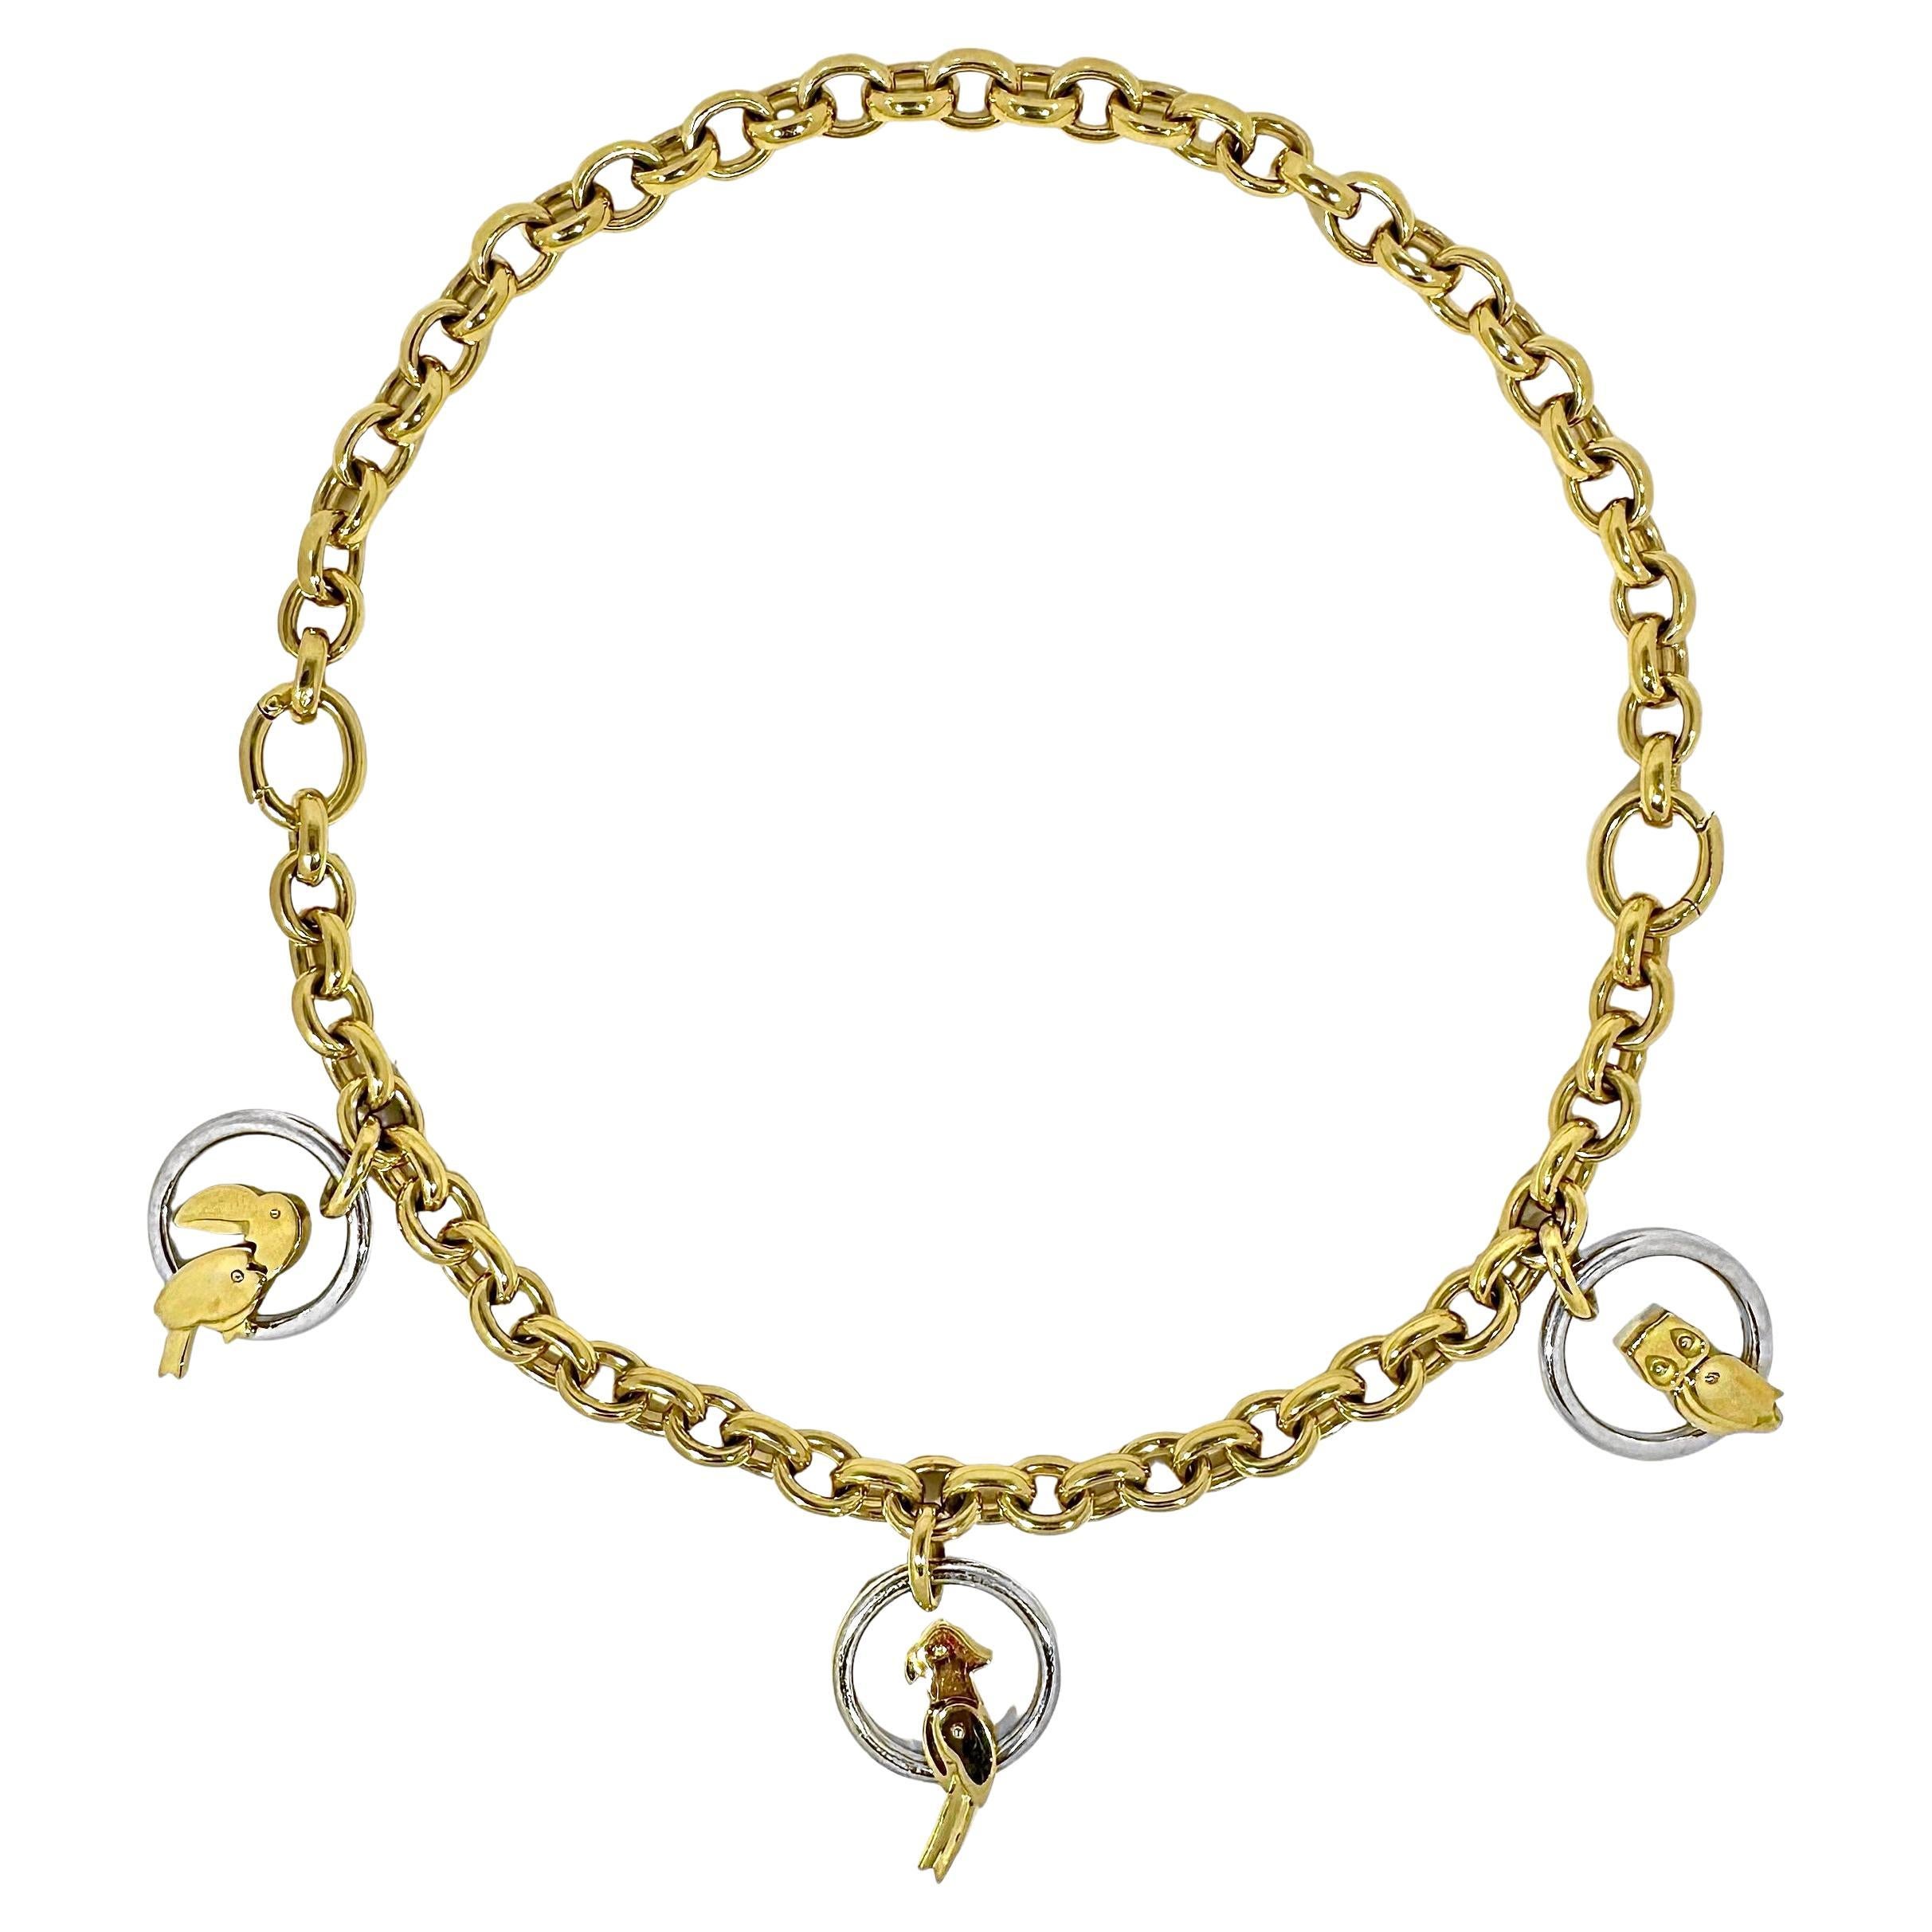 18k Gold 15 Inch Necklace with Aviary Theme Made from 2 Bracelets by Pomellato  For Sale